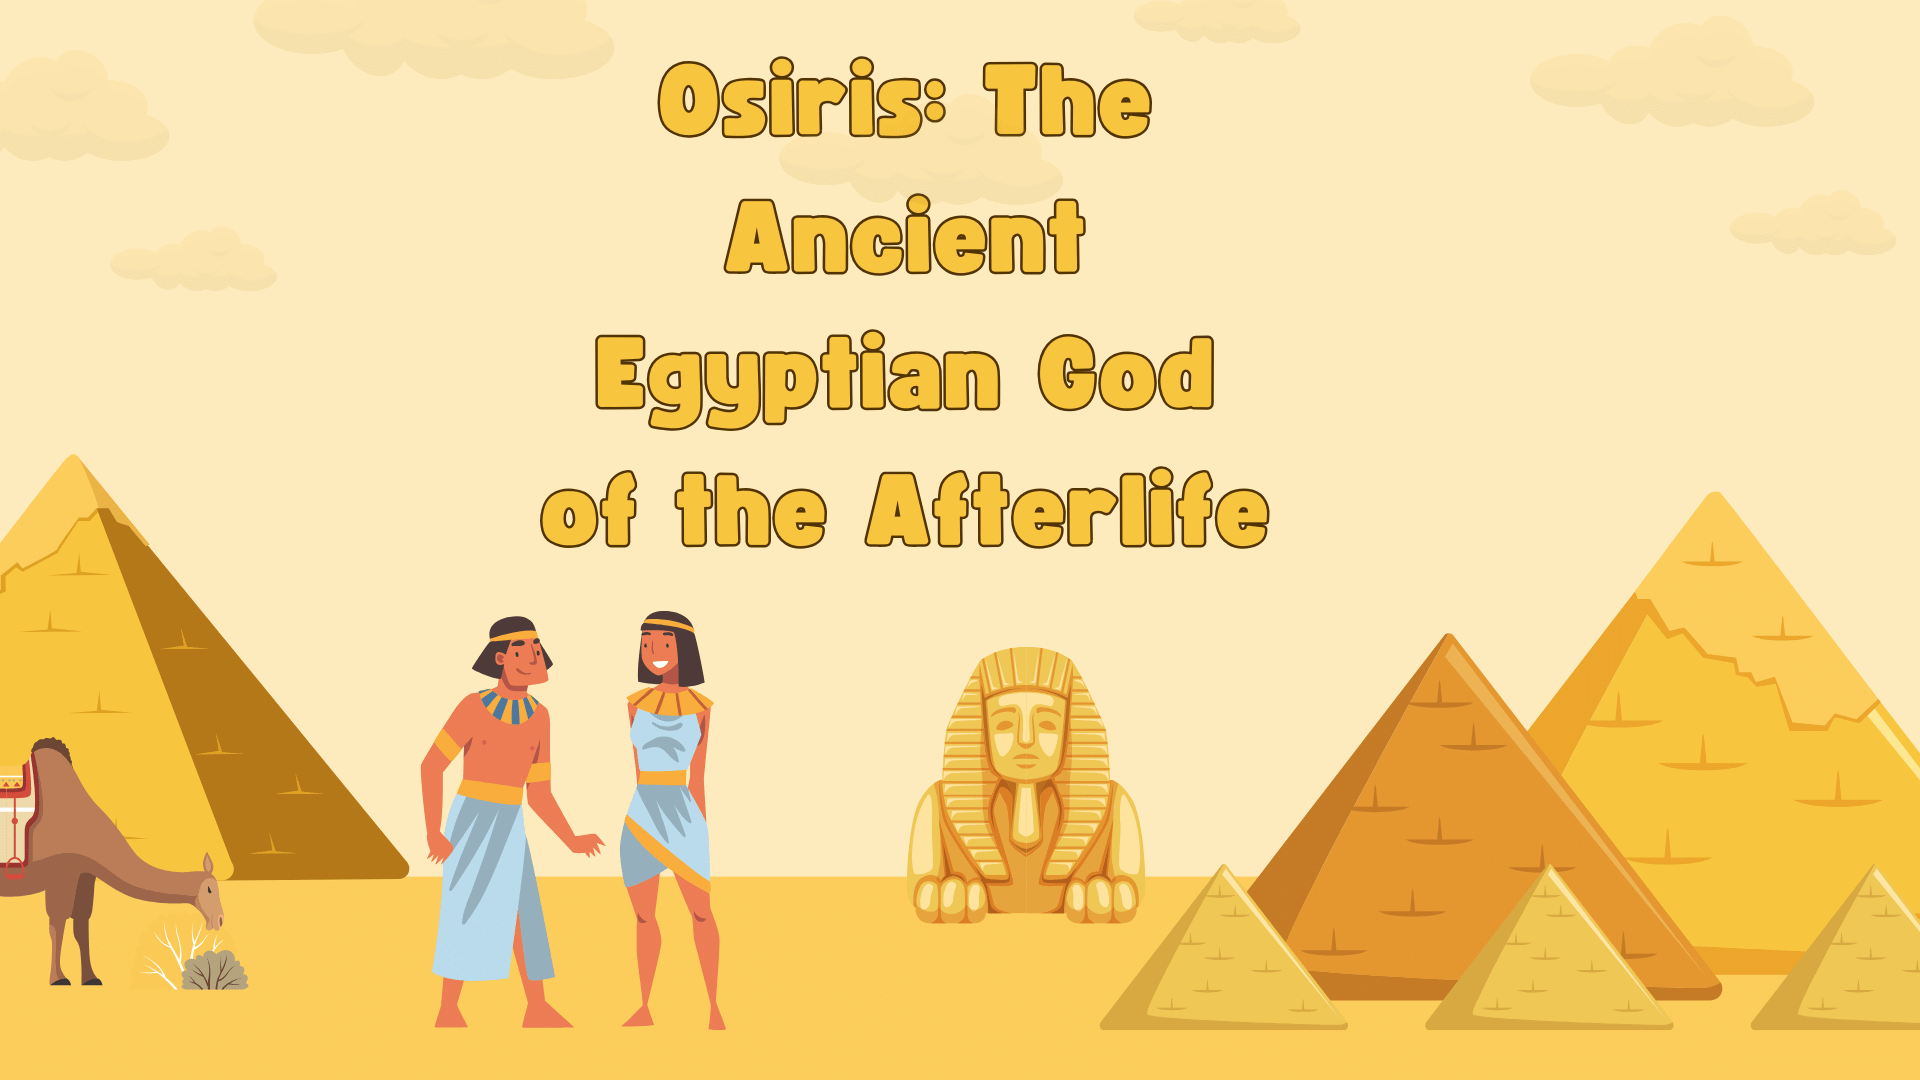 Osiris: The Ancient Egyptian God of the Afterlife